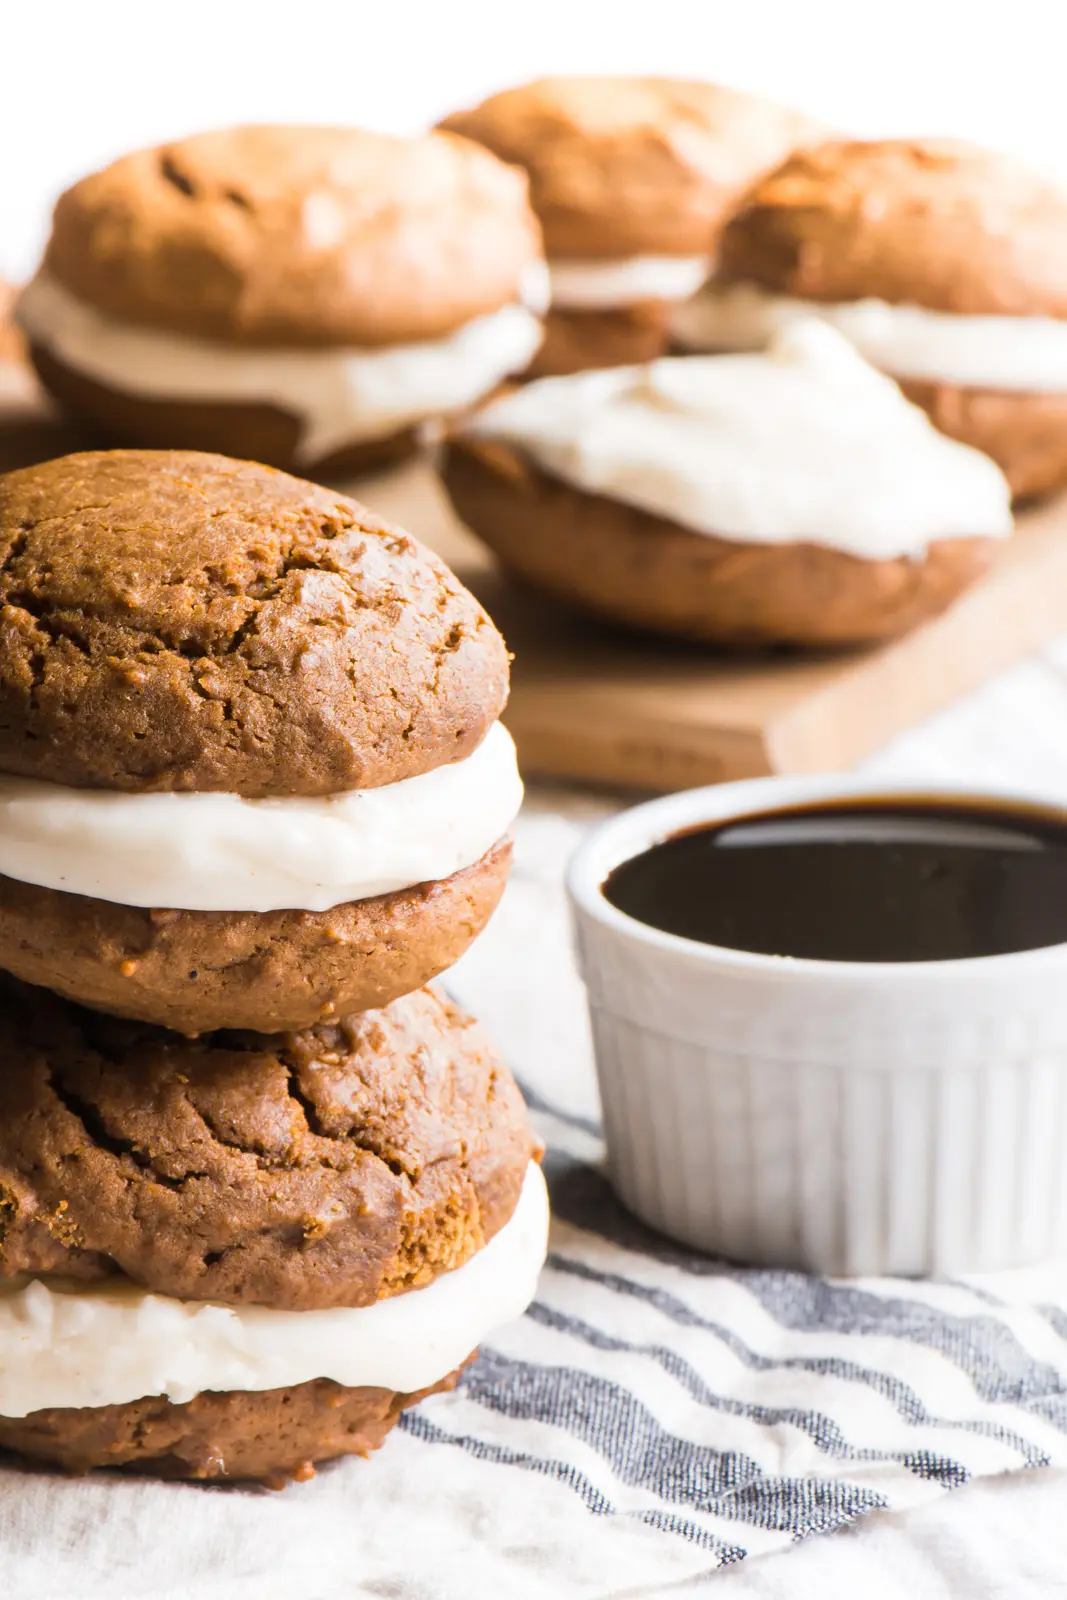 Two vegan gingerbread whoopie pies are stacked and sitting next to a bowl of syrup.